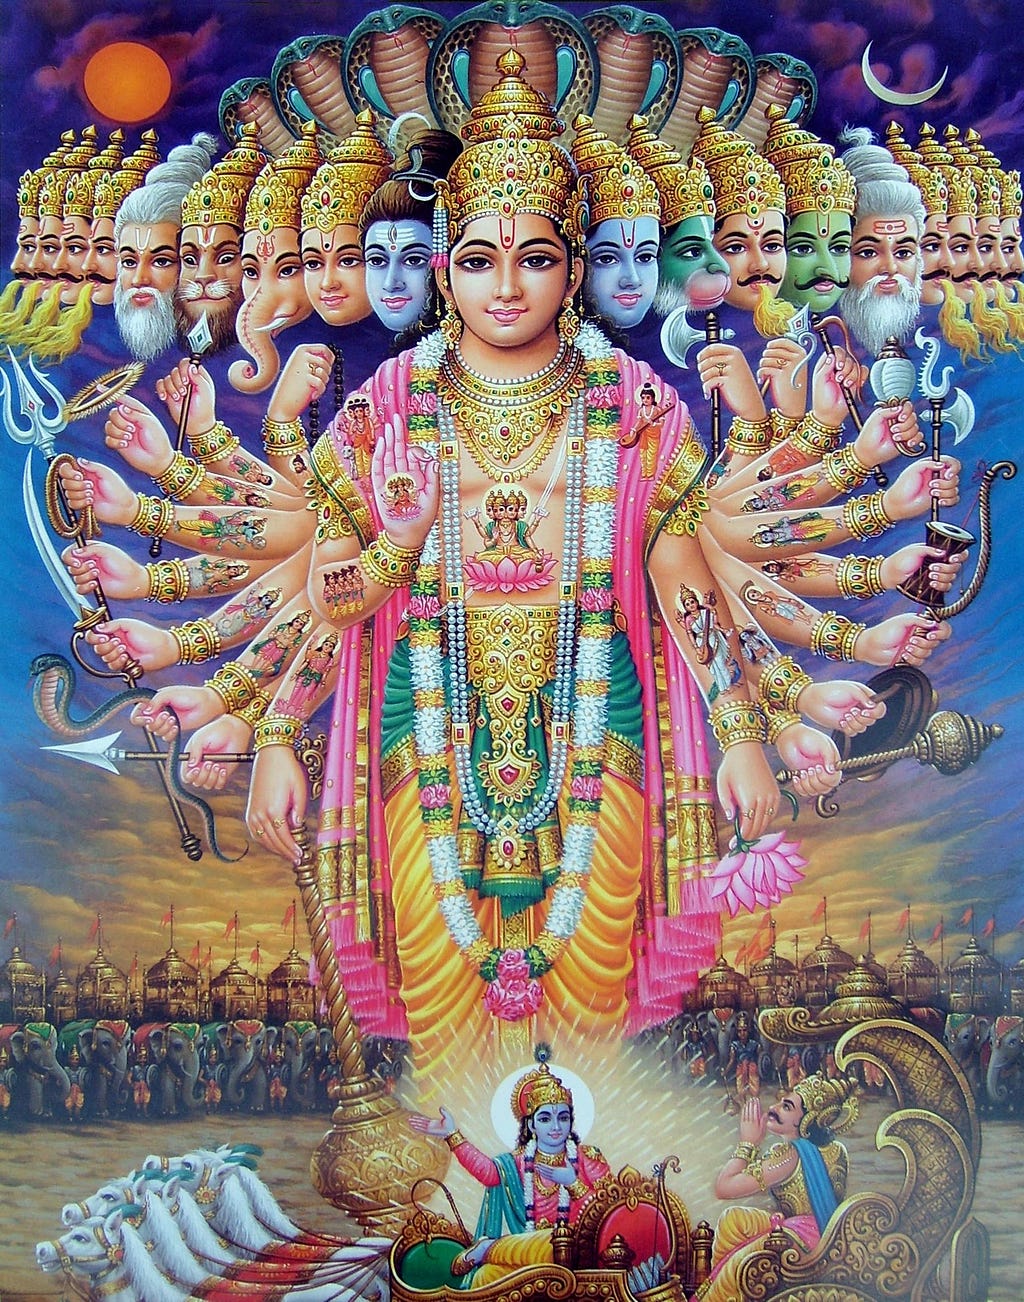 multi-armed hindu deity who has different objects in each hand symbolizing all his/her different powers